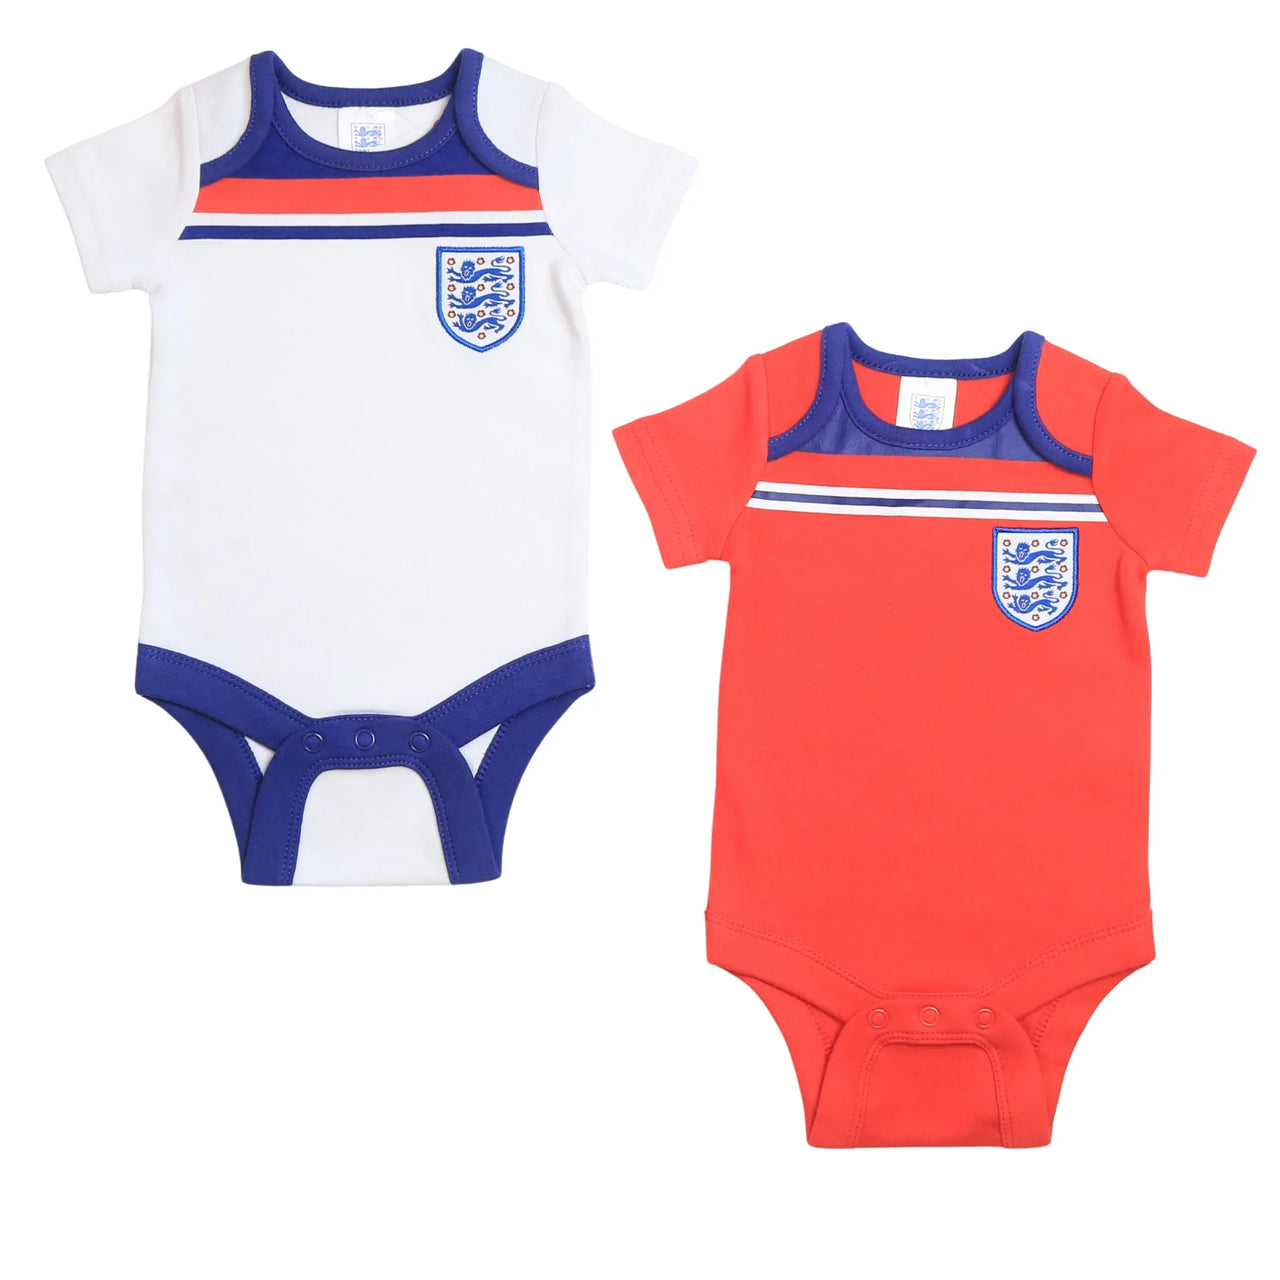 England Football 1982 World Cup Retro Baby 2 Pack Bodysuits